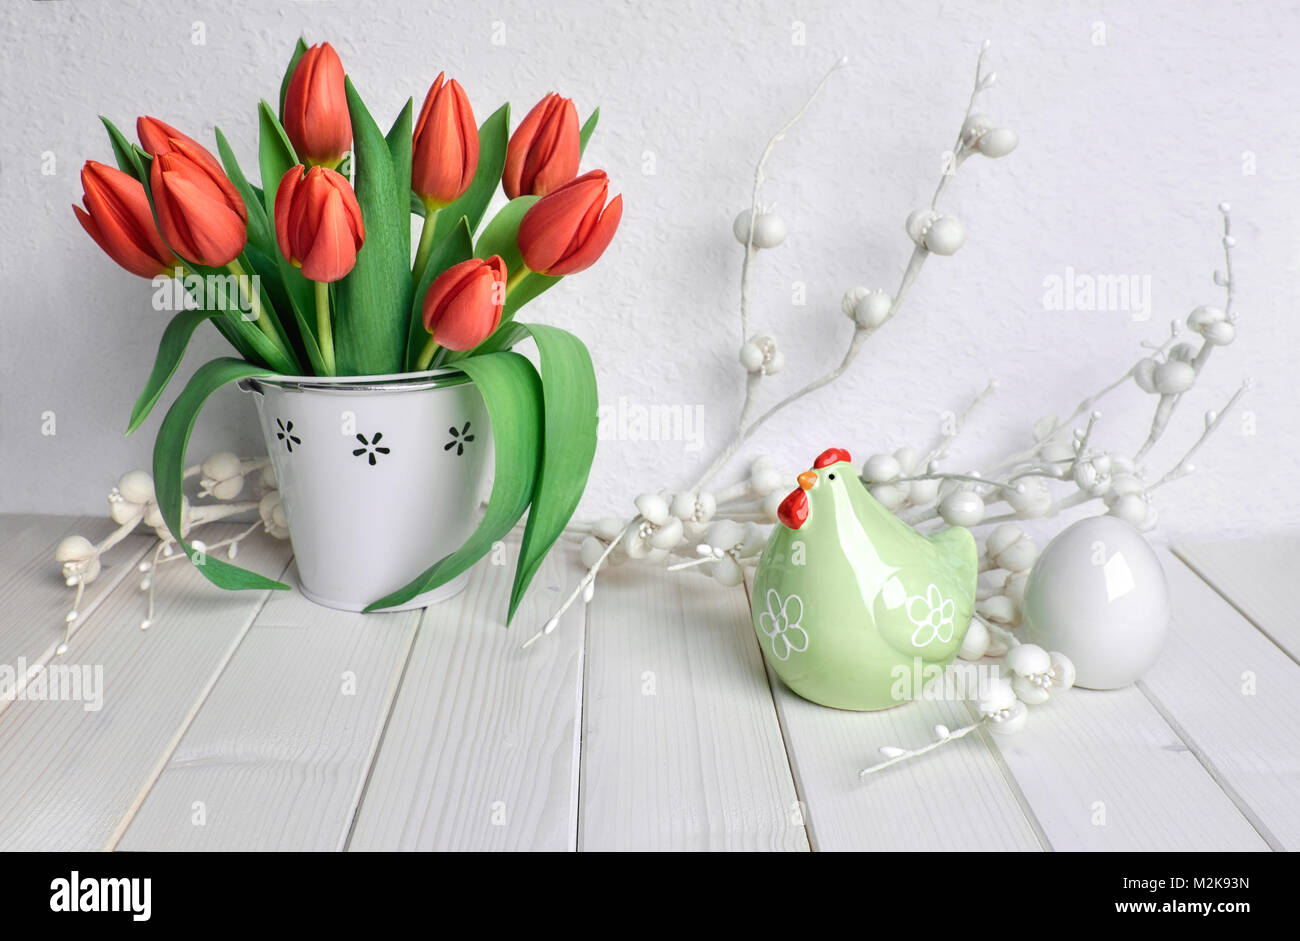 Easter greeting card design with bunch of red tulips, ceramic hen and egg on light spring background with paper flowers Stock Photo